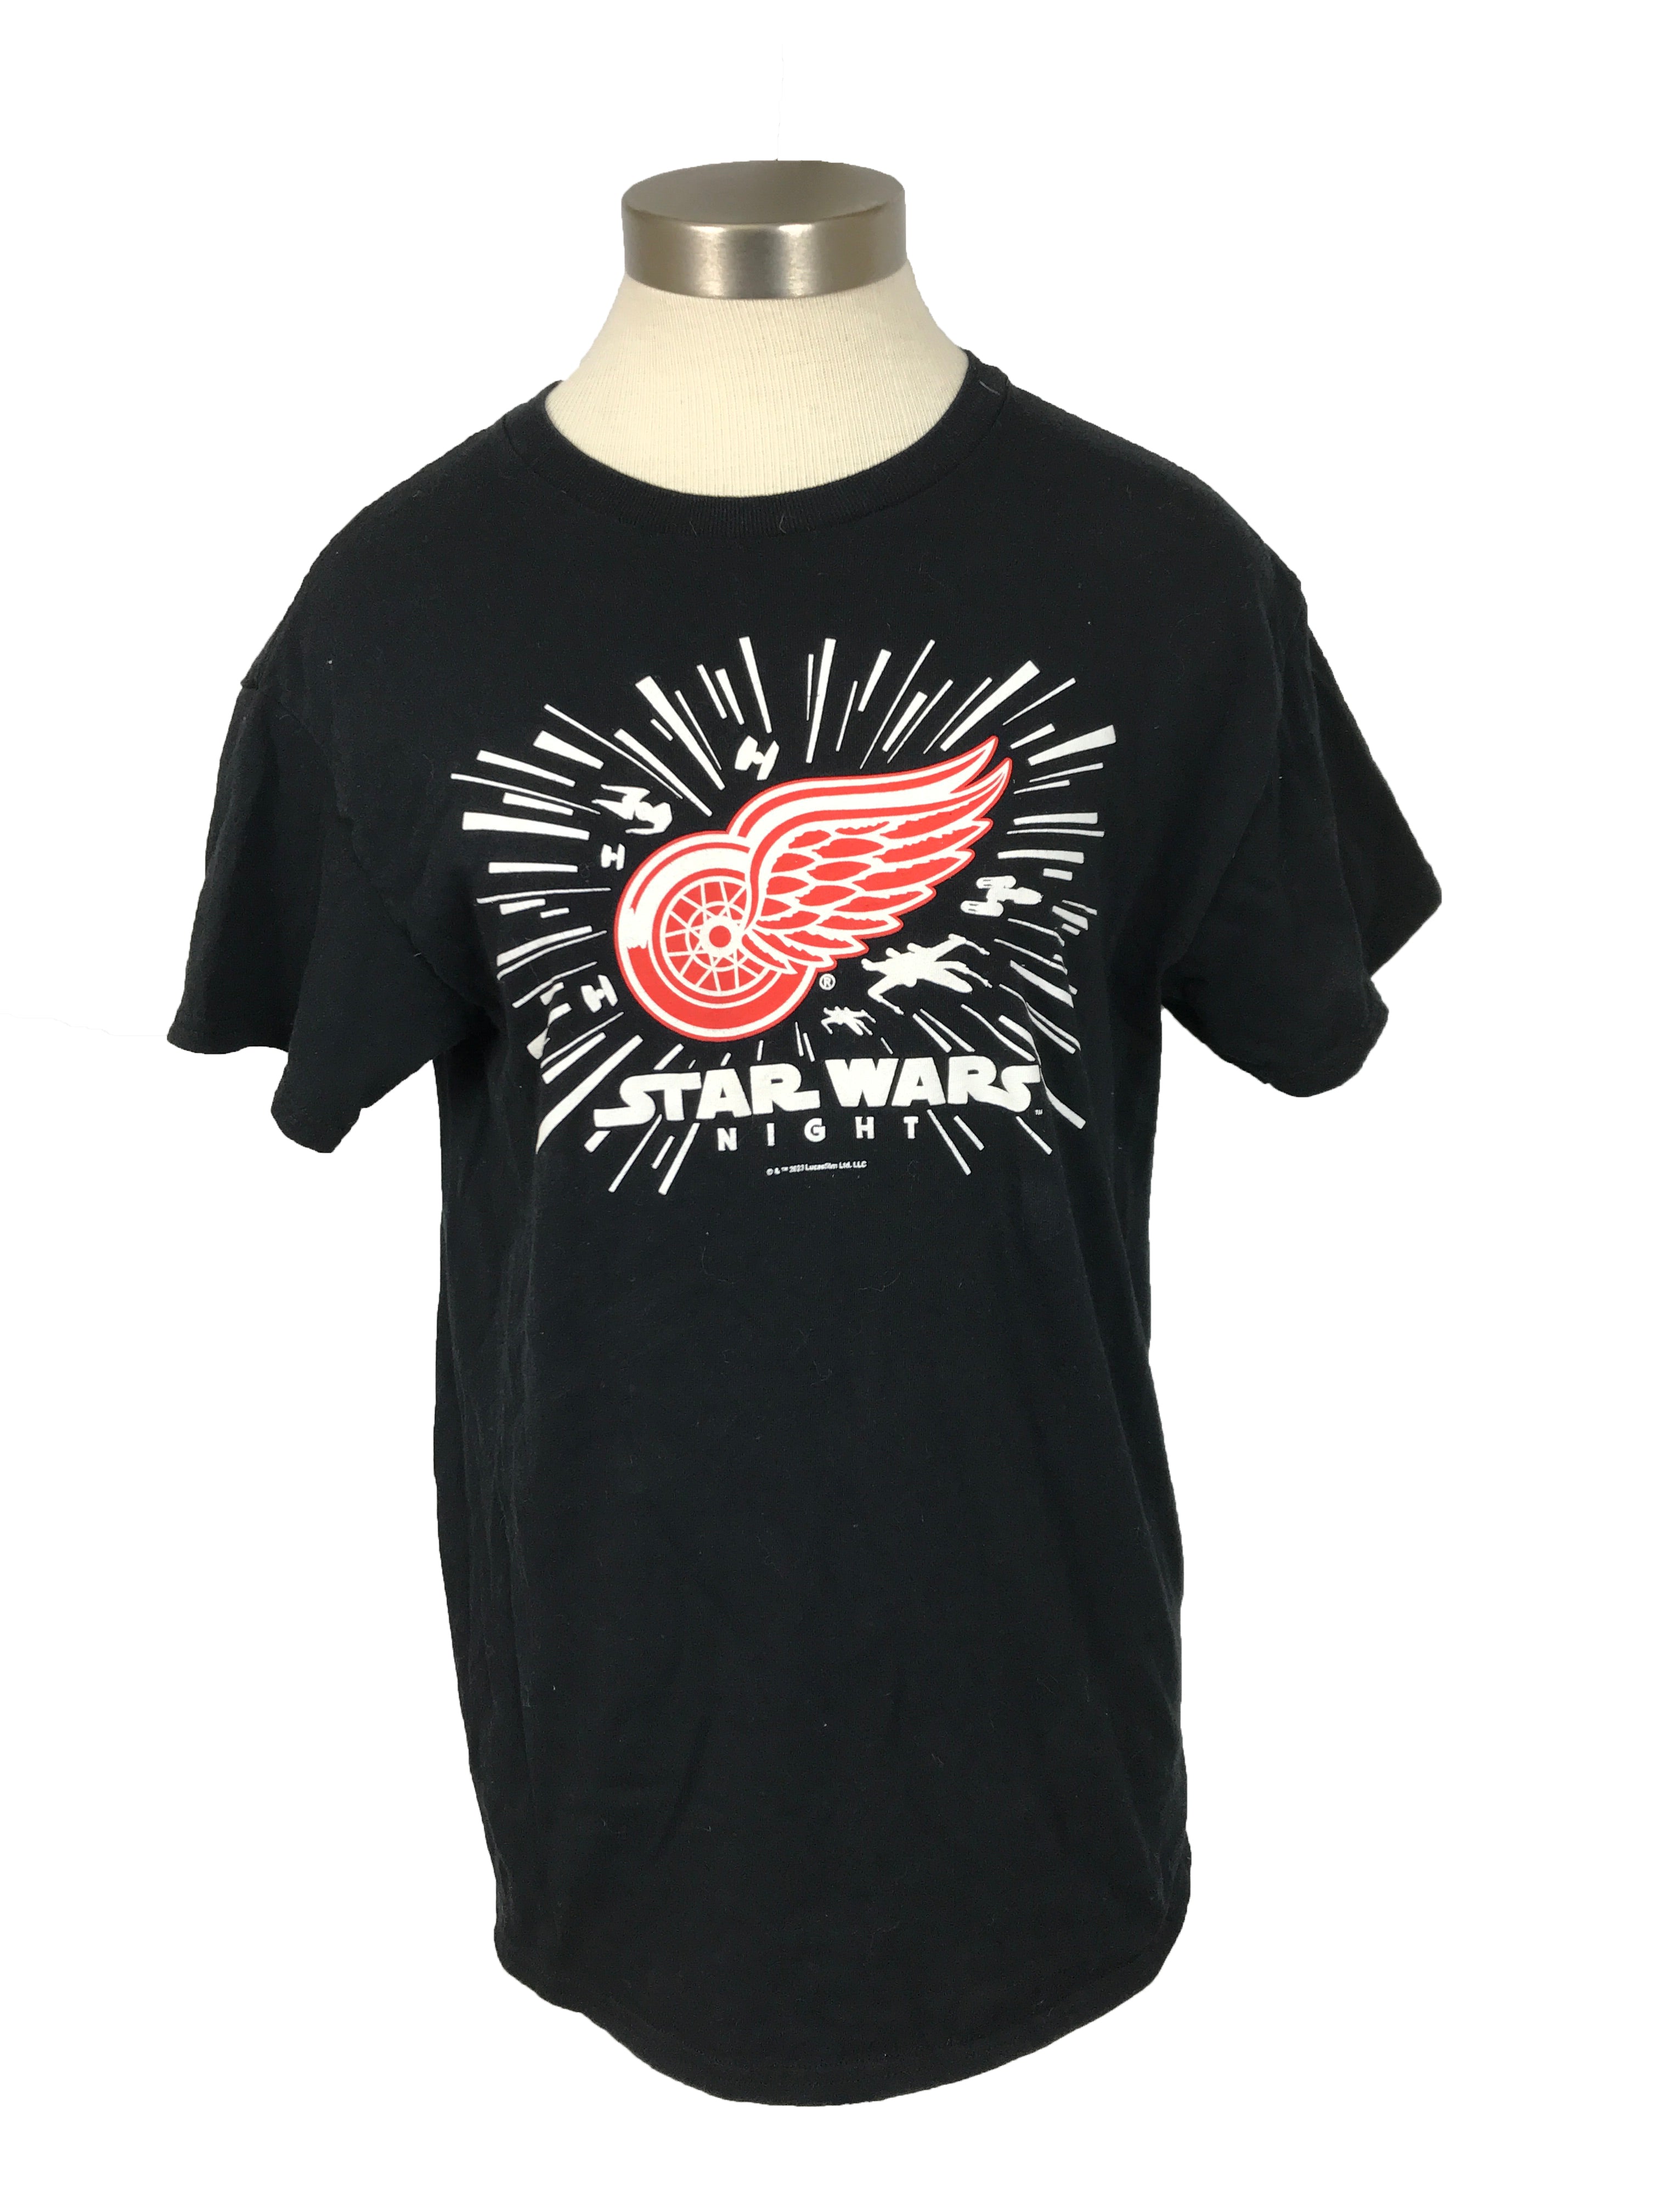 Red Wings x Star Wars Black Shirt Unisex Size M